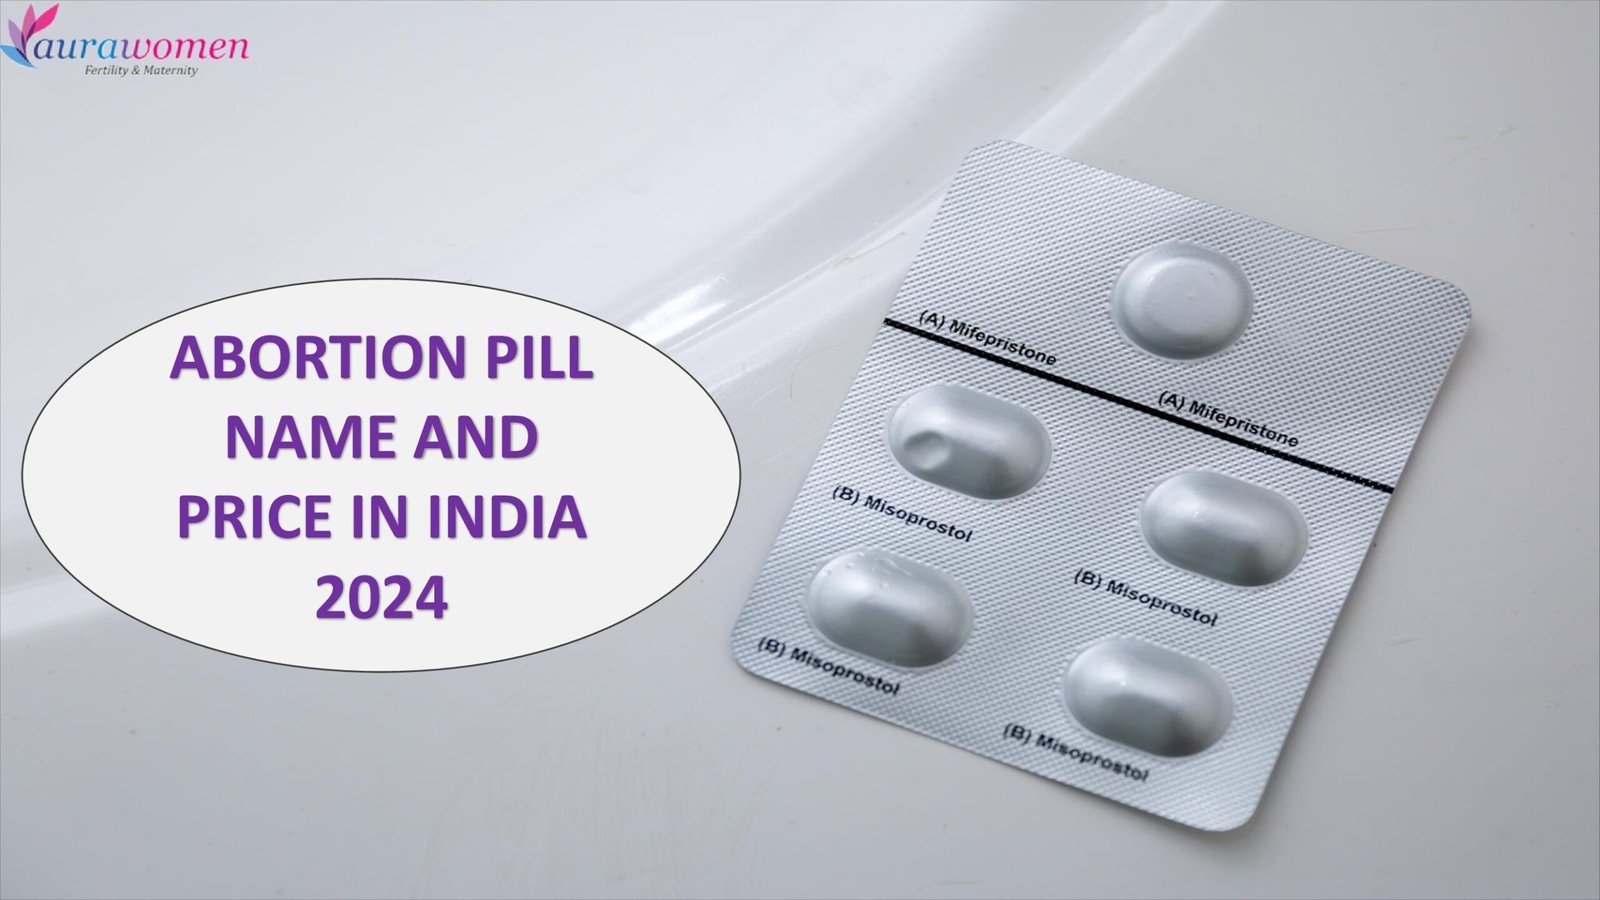 ABORTION PILL NAME AND PRICE IN INDIA